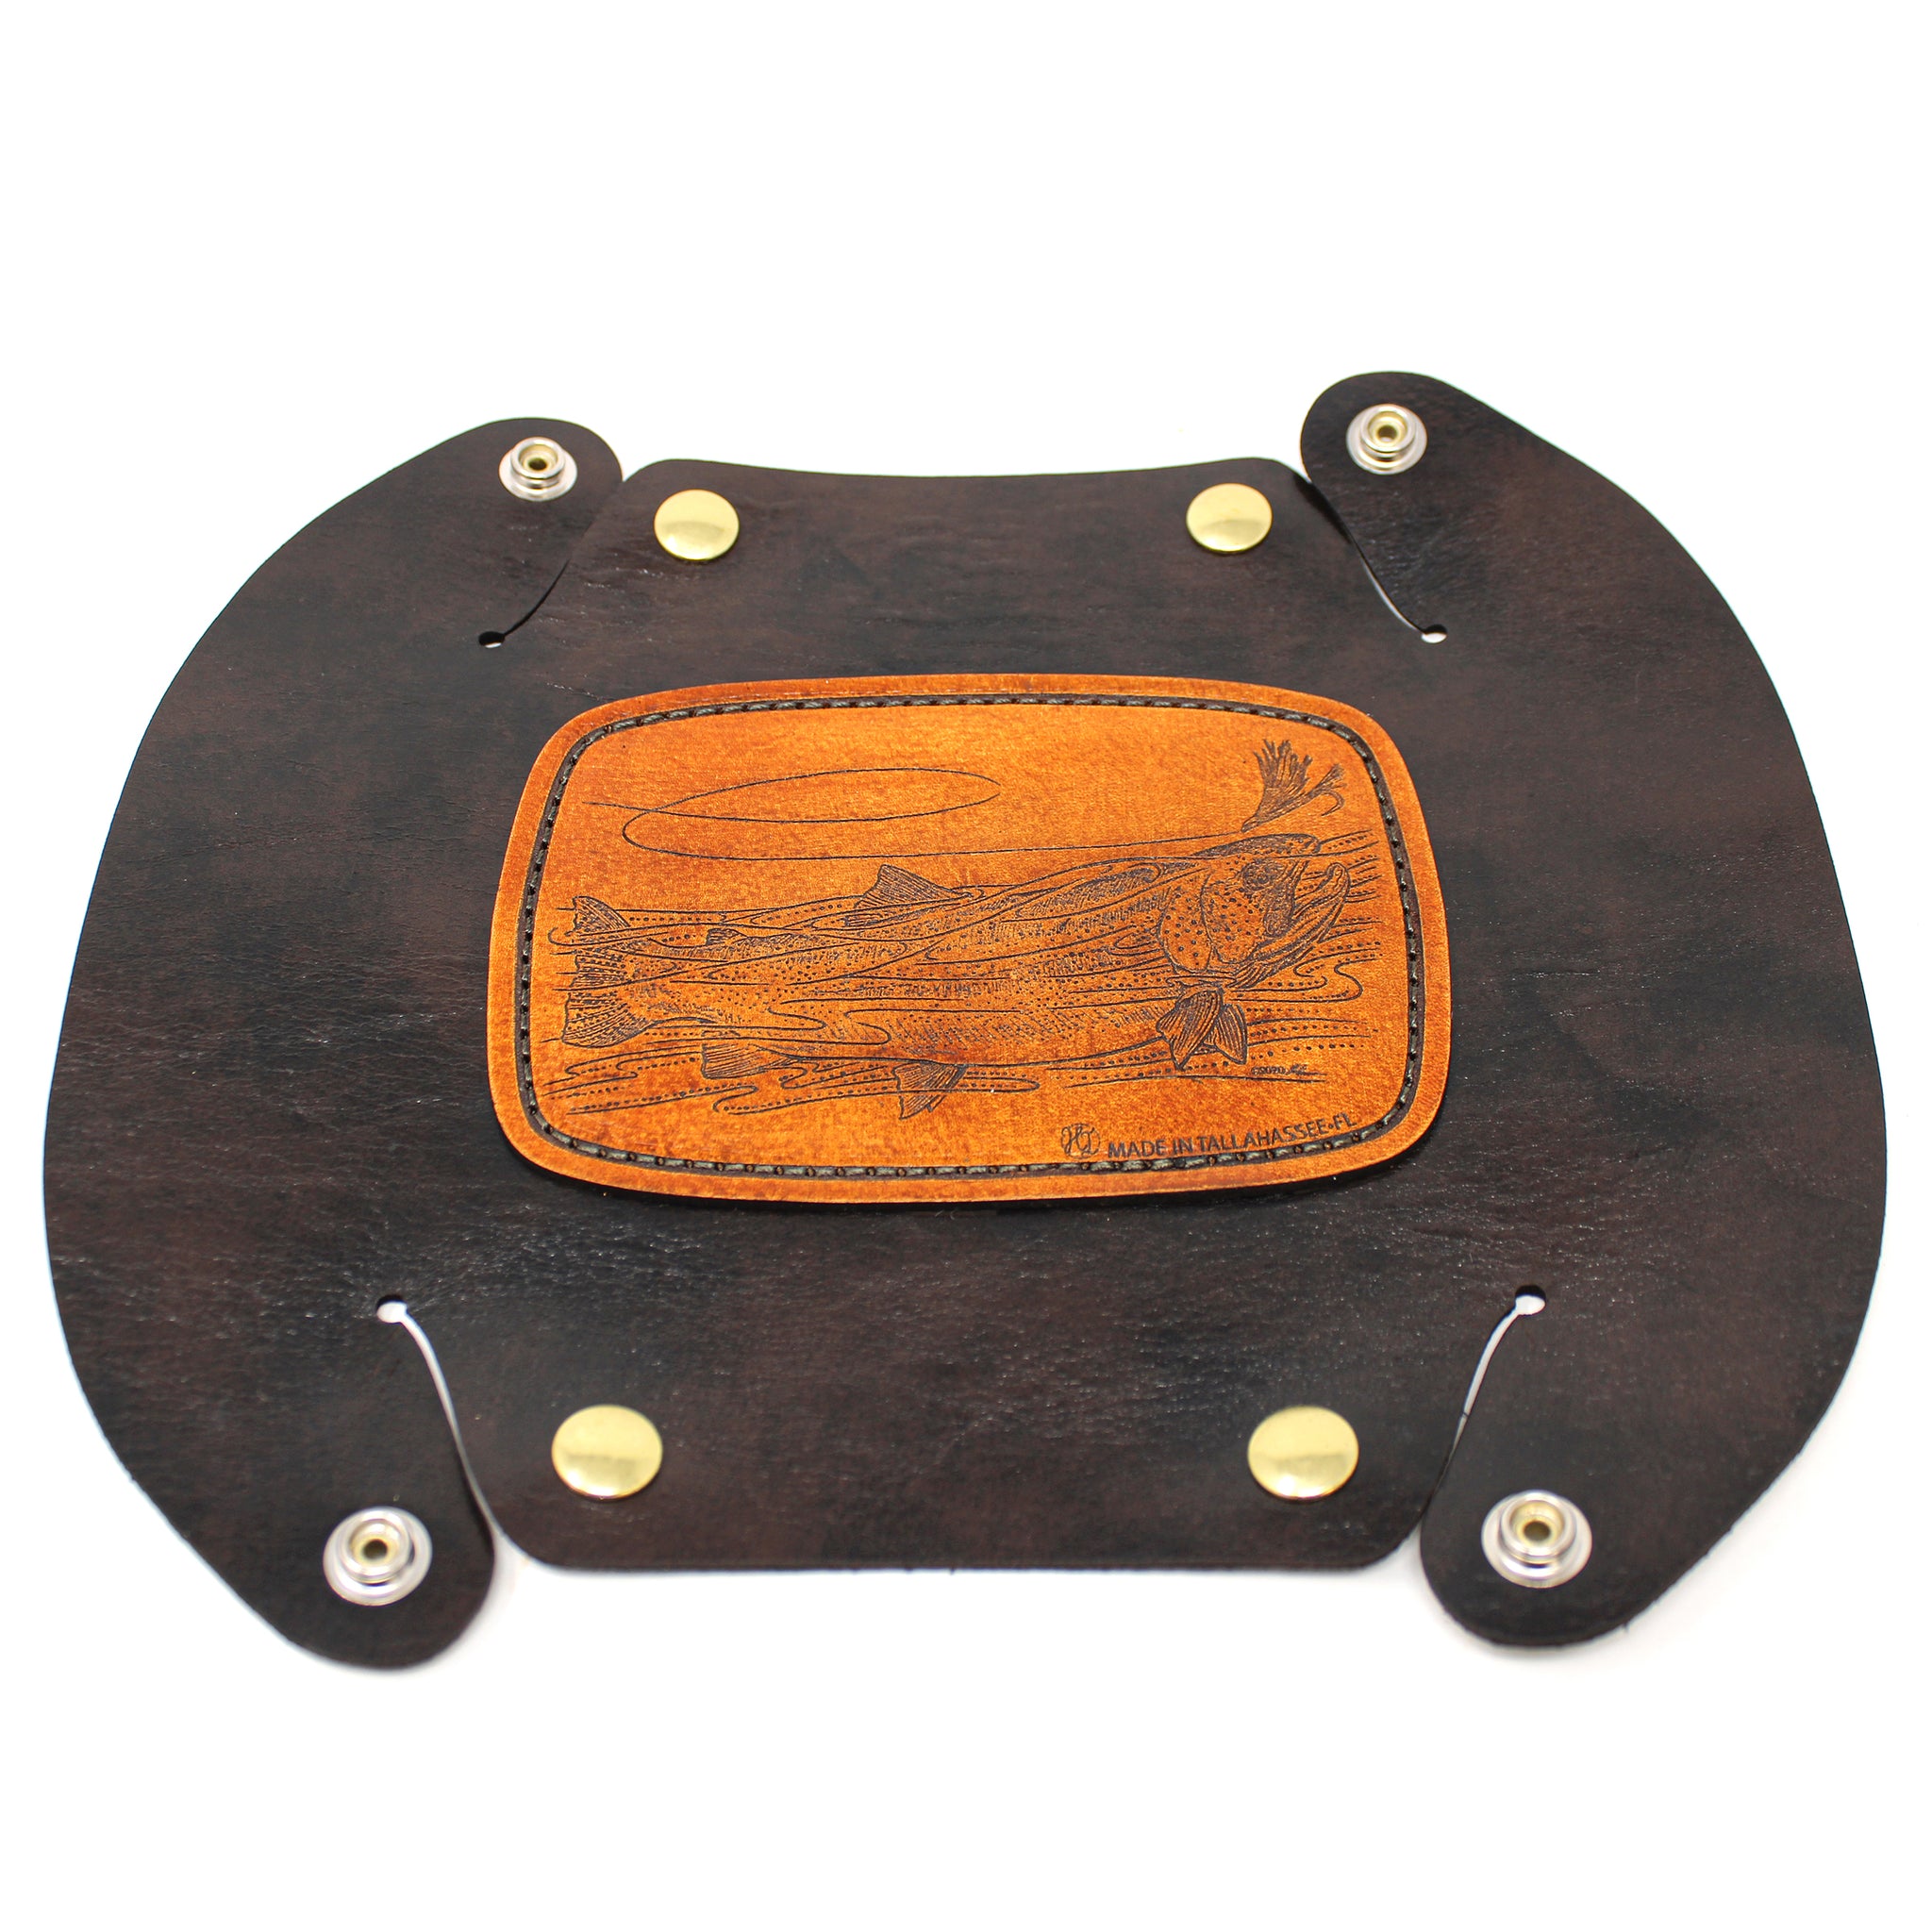 Leather Valet Tray - Rainbow Trout